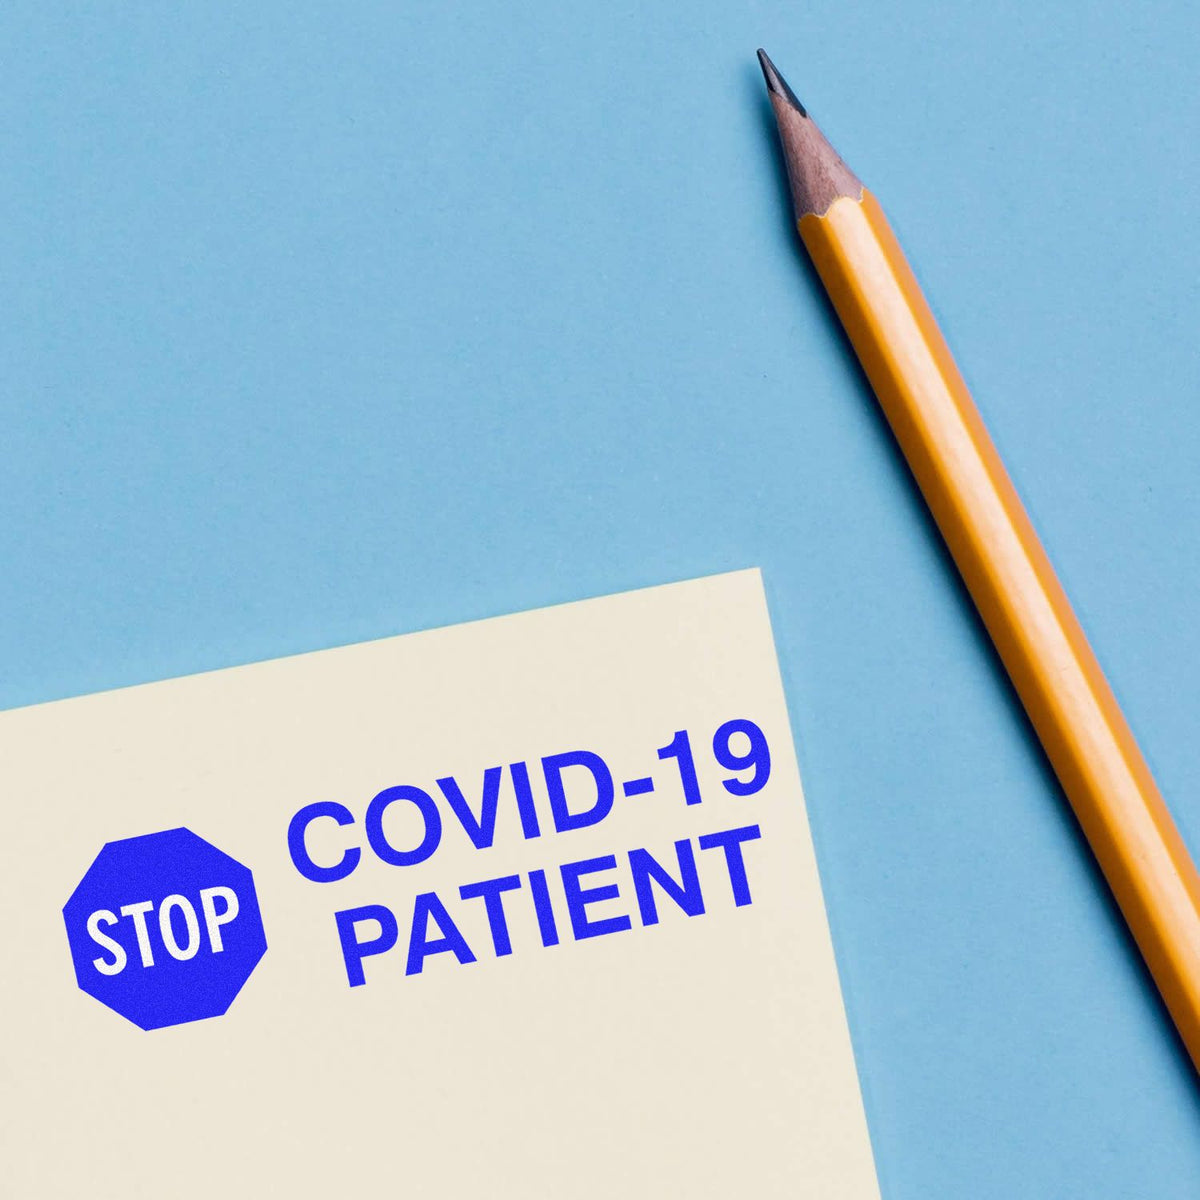 Large Stop Covid Patient Rubber Stamp In Use Photo